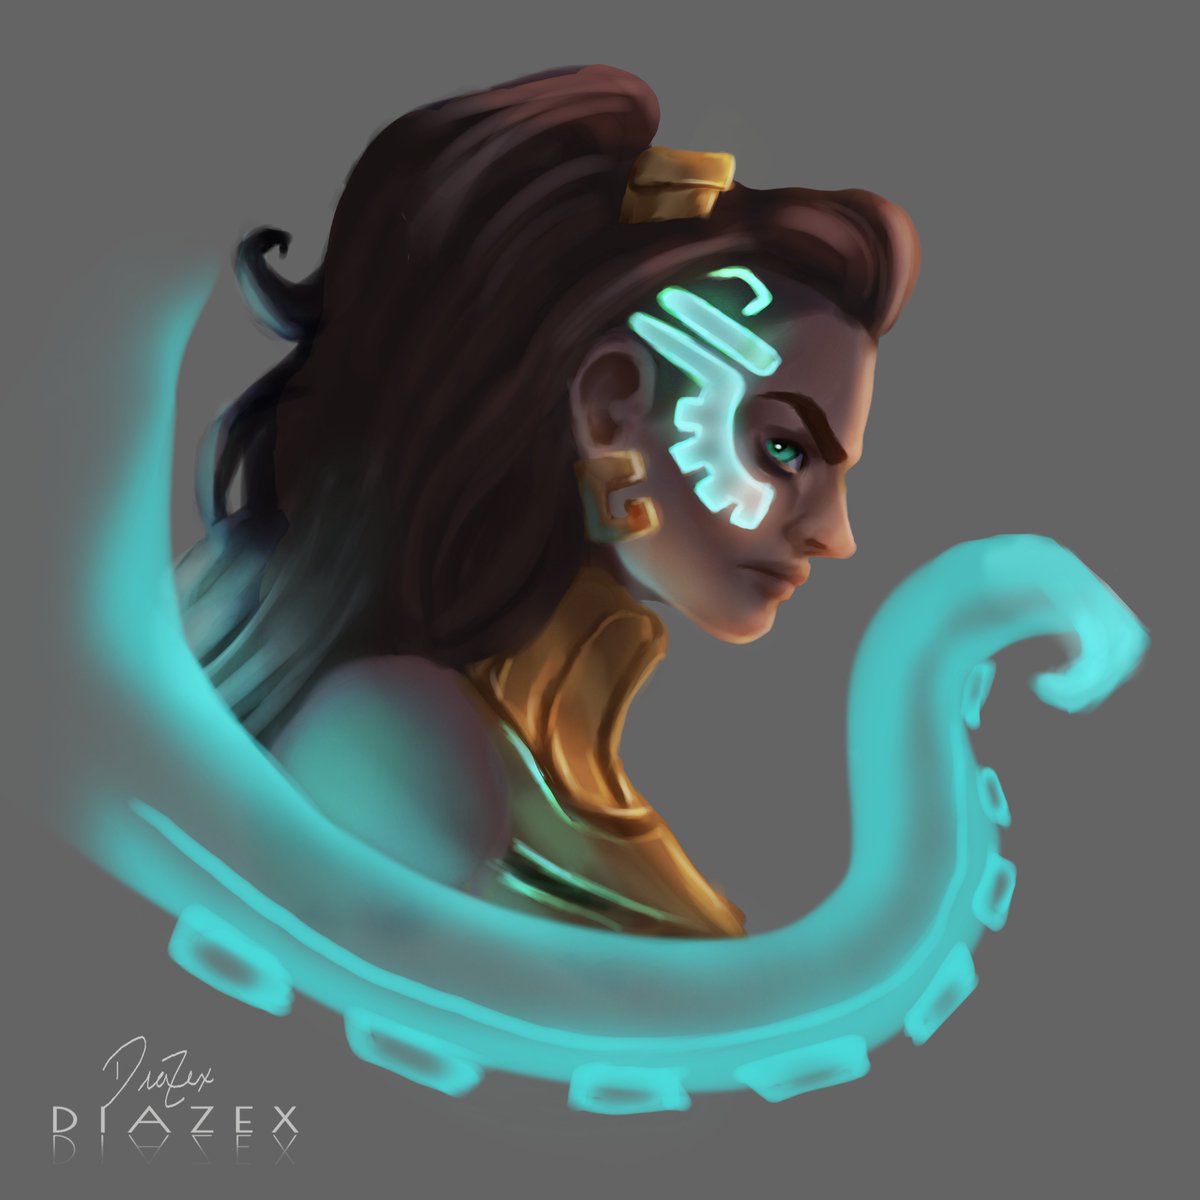 12. "Live your life, chase what you desire, what else matters? #illaoi. #leagueoflegends. 